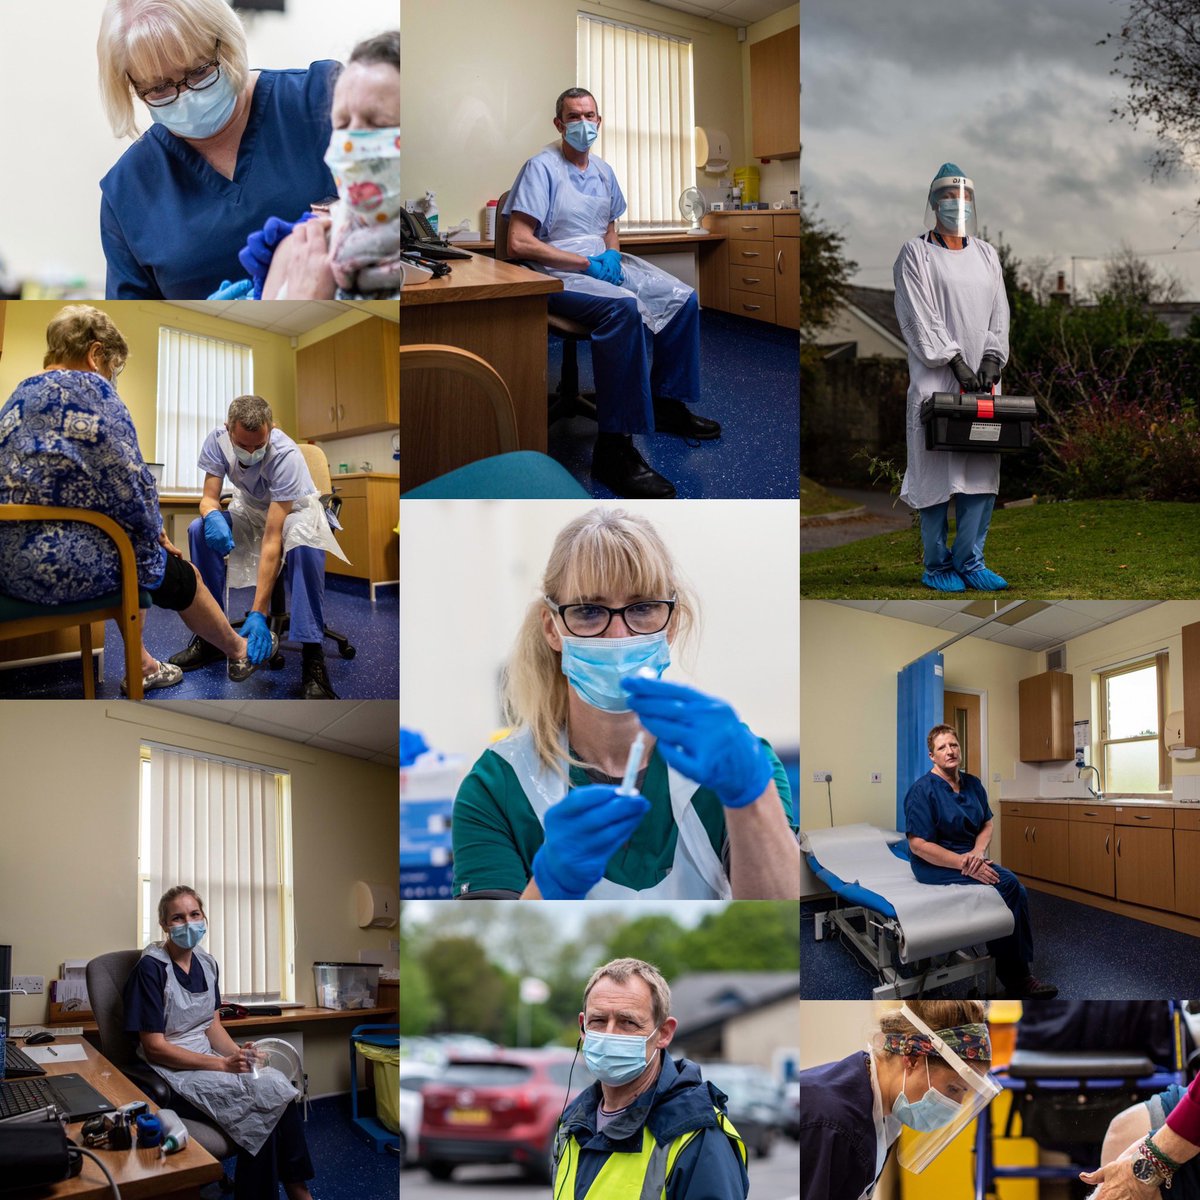 A true honour to be working with @DorsetCCG documenting the heroes working on the frontline throughout the pandemic.

Here’s some of the brilliant staff from the @blackmorevaleGP and more recently @poole_north_pcn at the vaccination clinic held The Hamworthy Club.

#nhsheroes